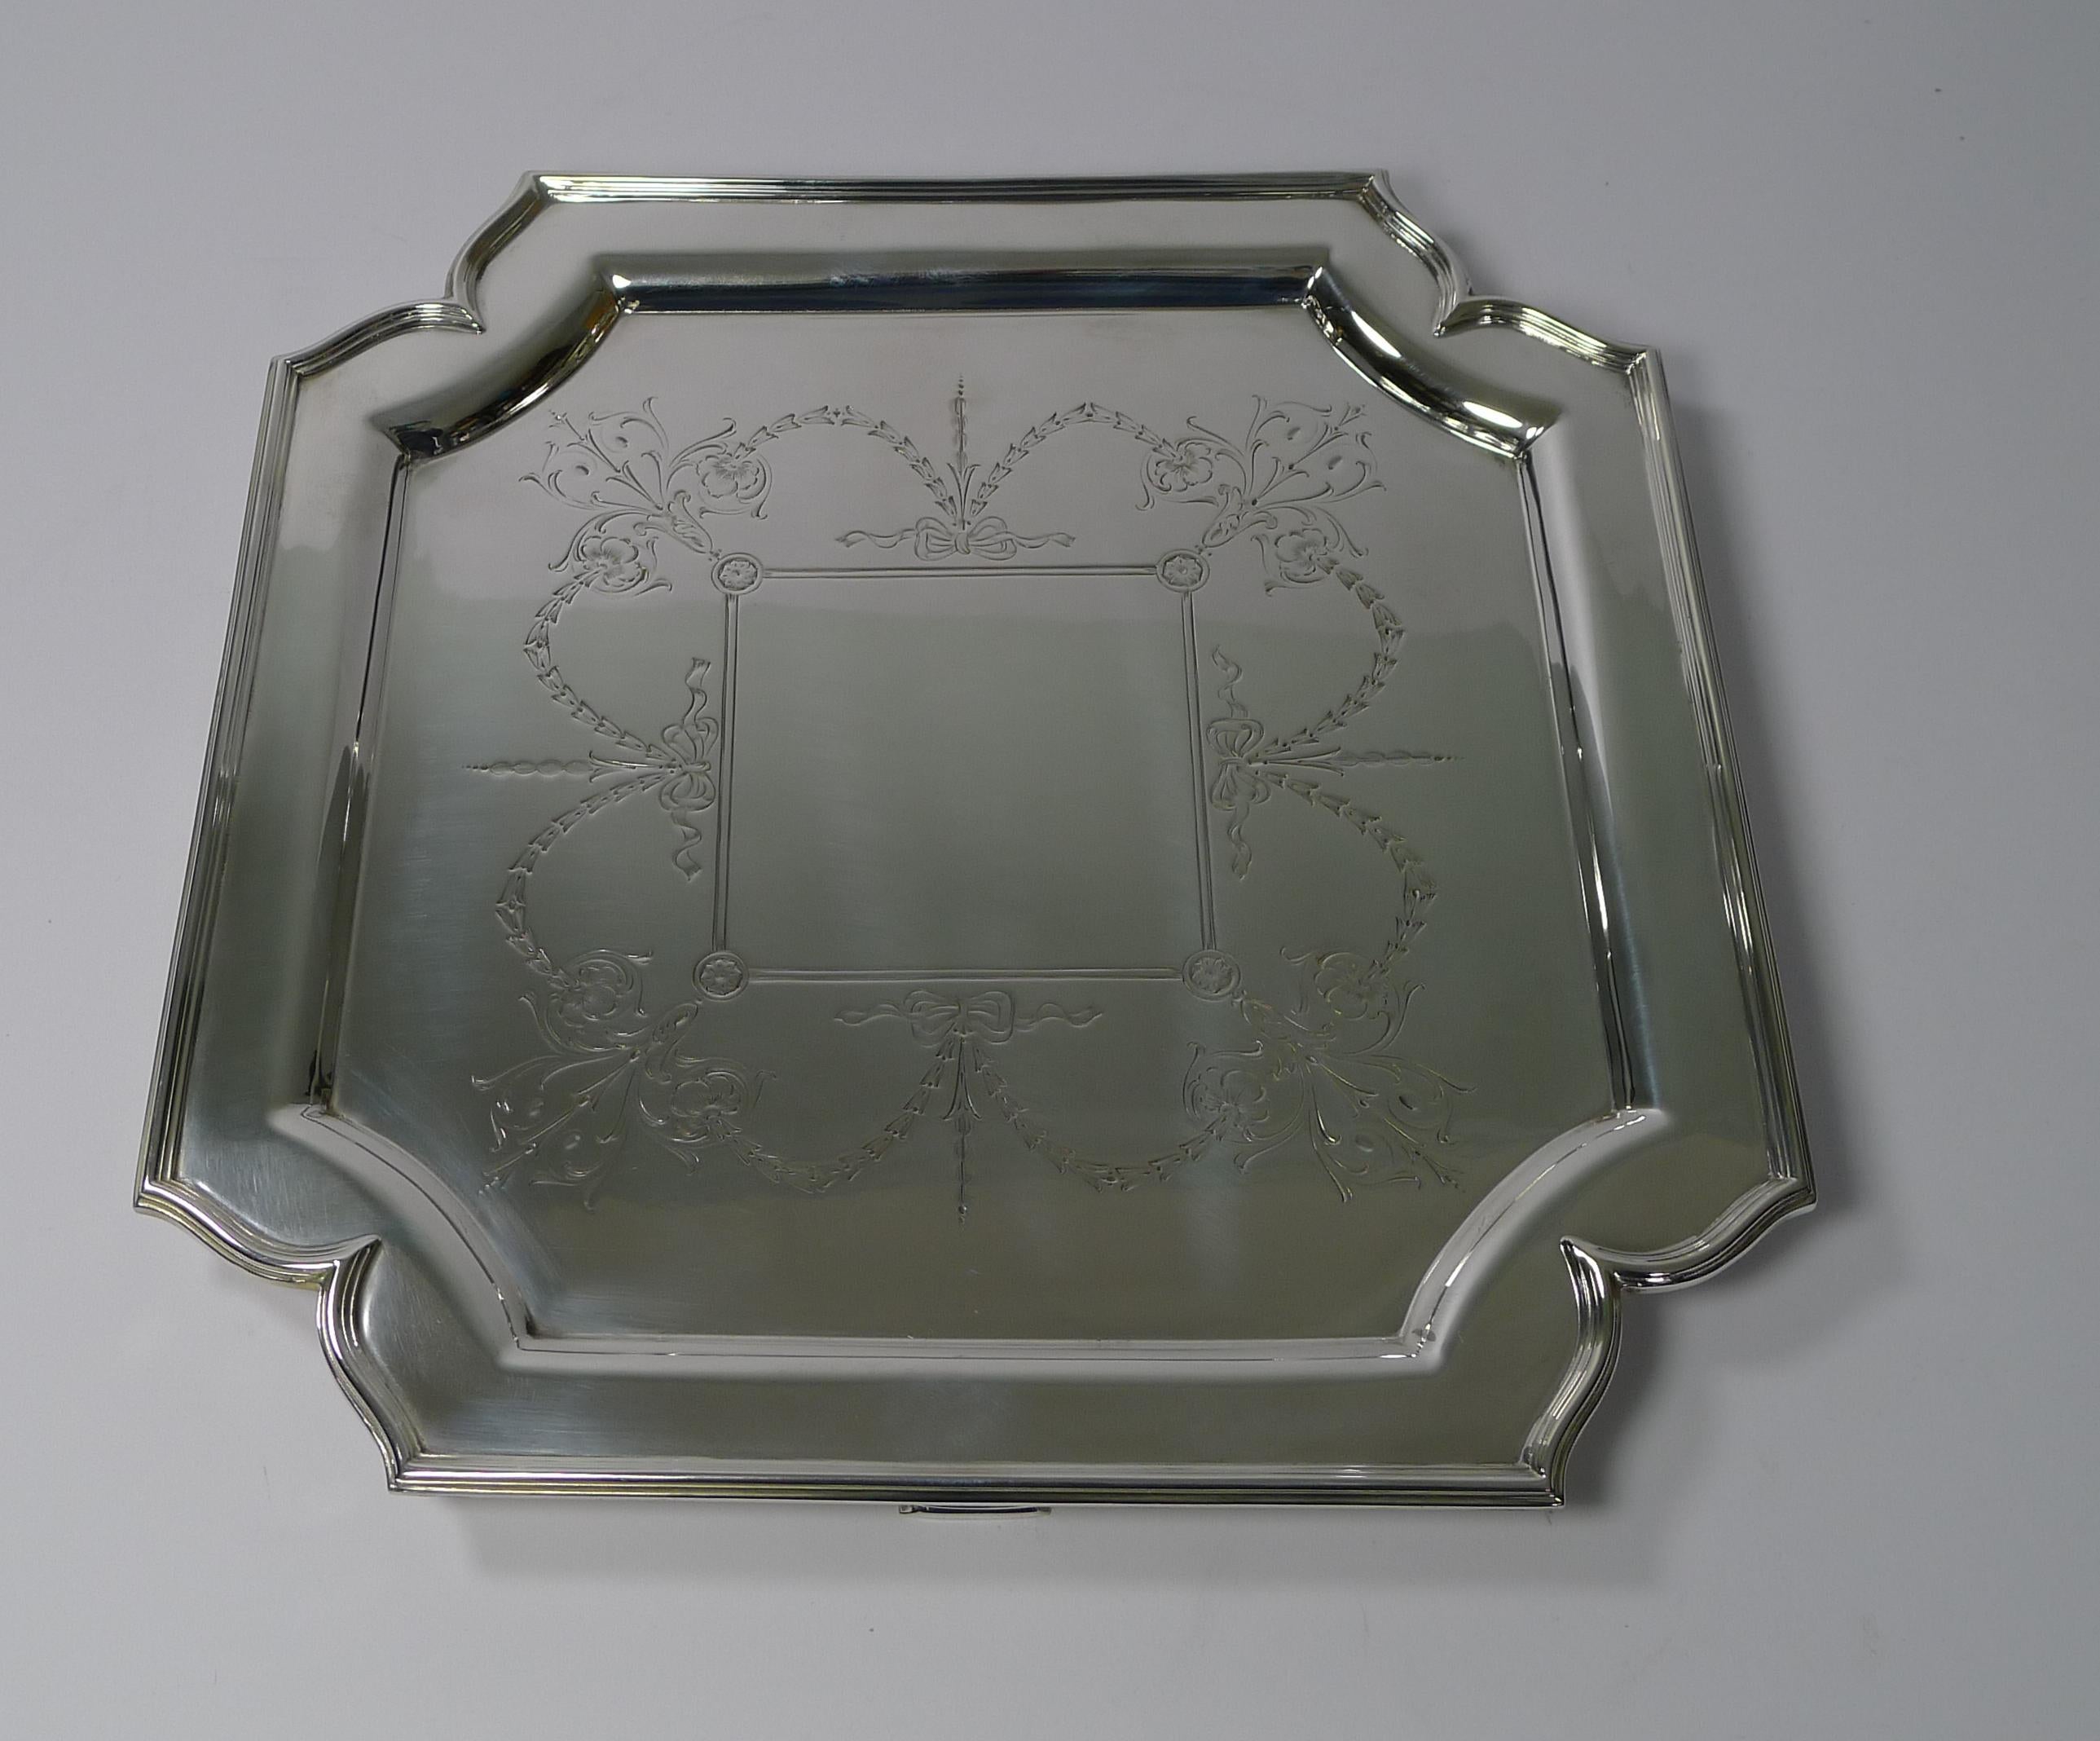 Antique English Silver Plated Salver / Tray by Roberts & Belk 1